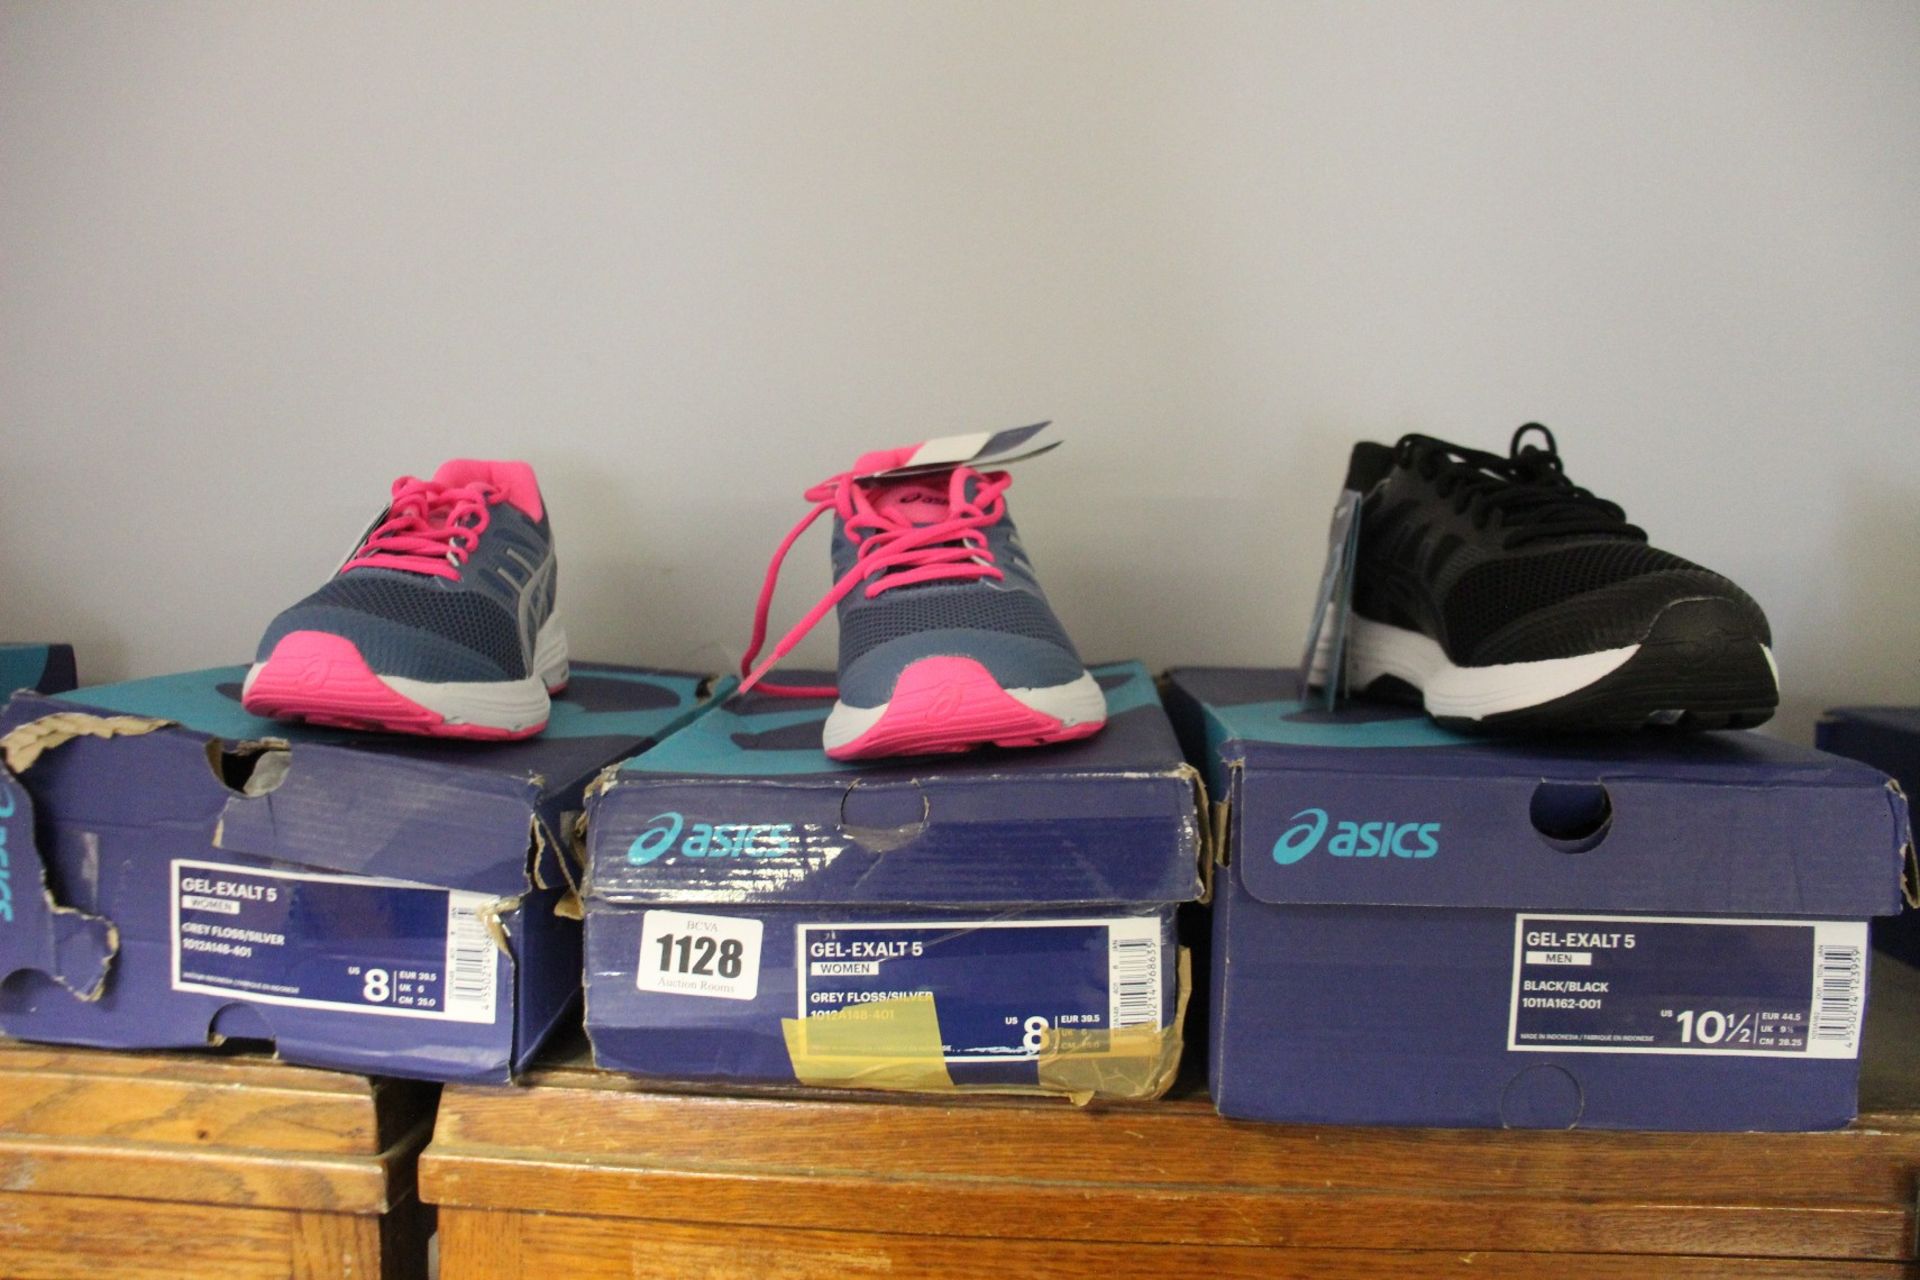 Two pairs of women's as new Asics Gel-Exalt trainers (UK 6) and a pair of men's Gel-Exalt 5 (UK 9.